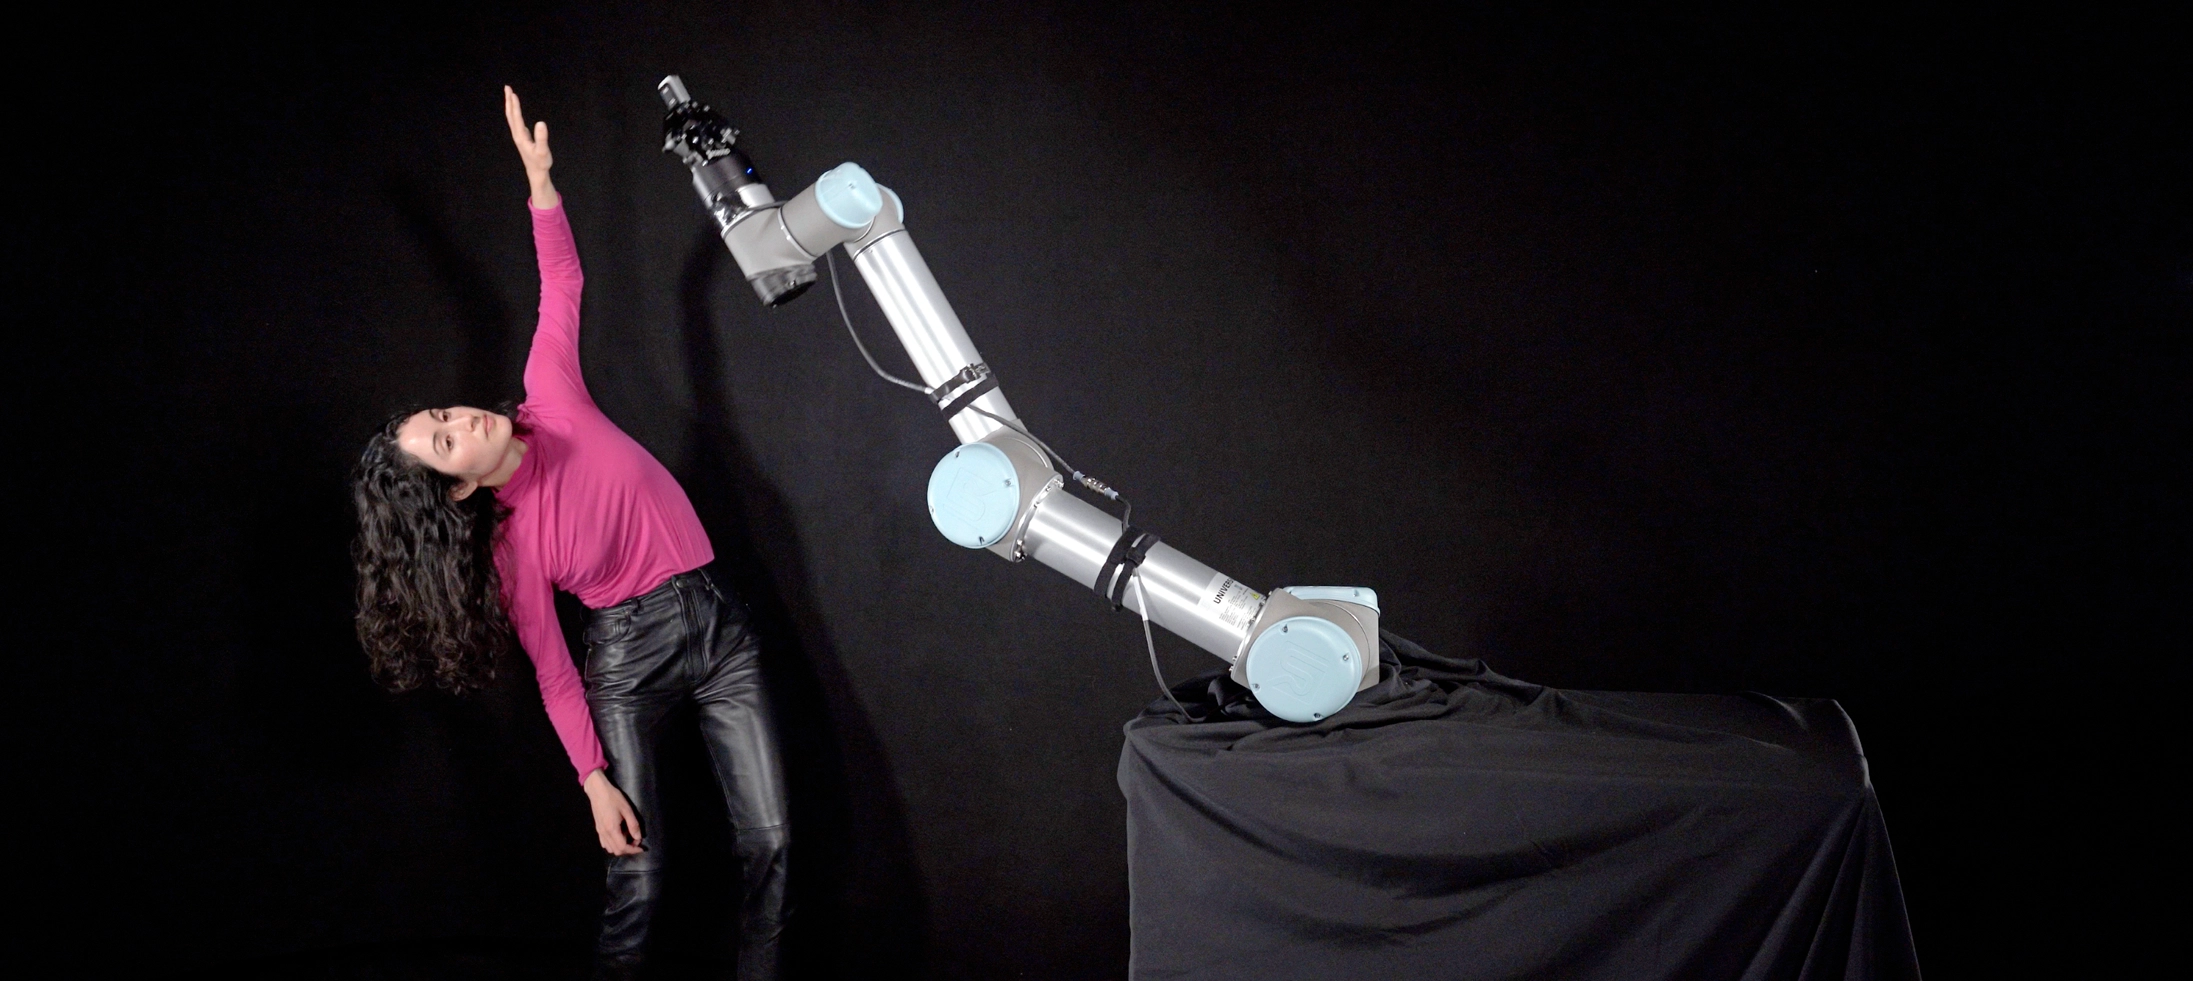 Catie Cuan dances against a dark backdrop, leaning to one side as she raises an arm overhead. In the foreground, a robotic arm imitates the motion as Cuan watches.